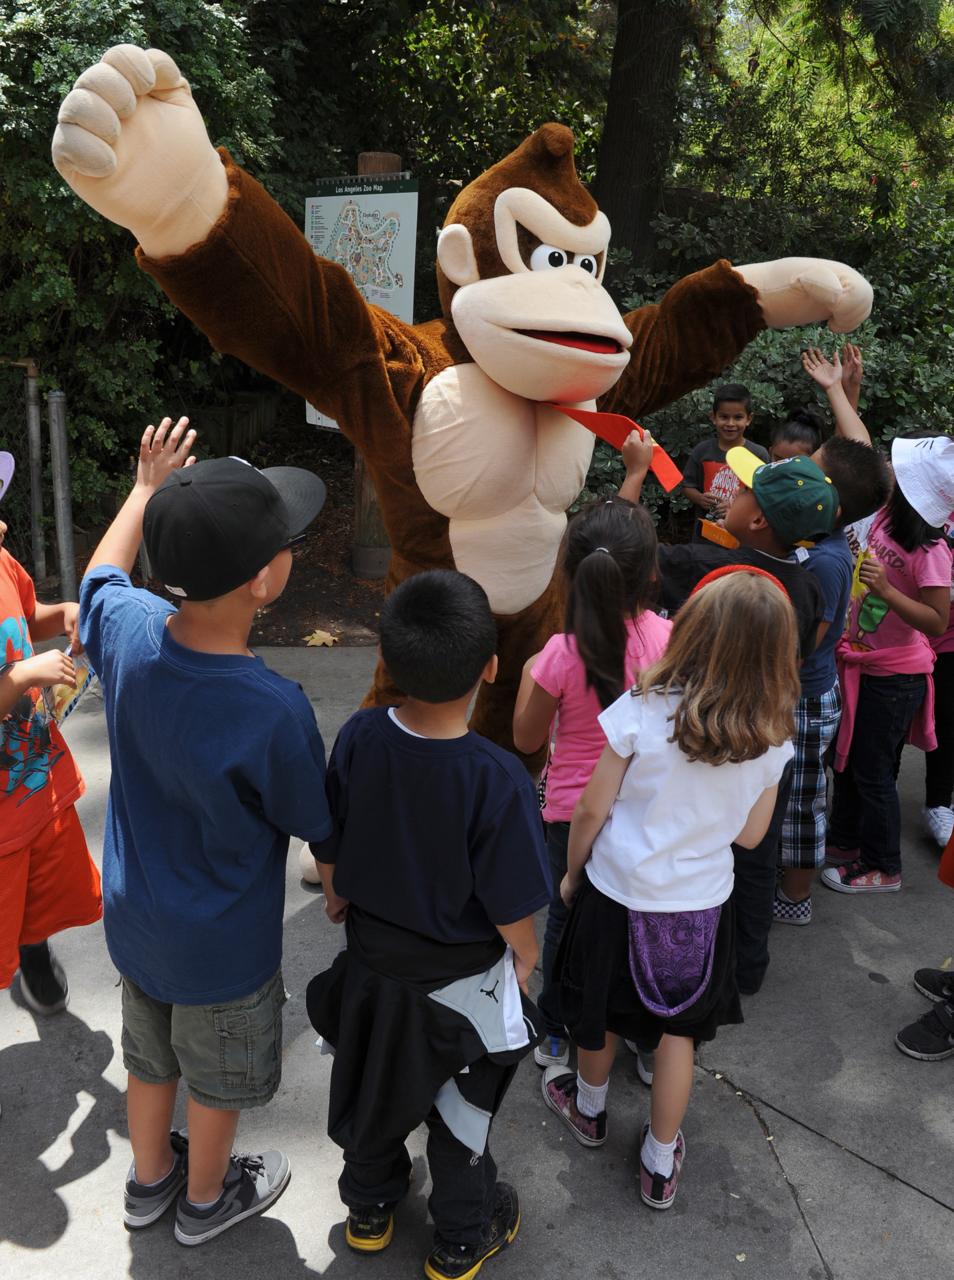 A May 2013 photo courtesy of Nintendo of America showing the Donkey Kong actor at the LA Zoo